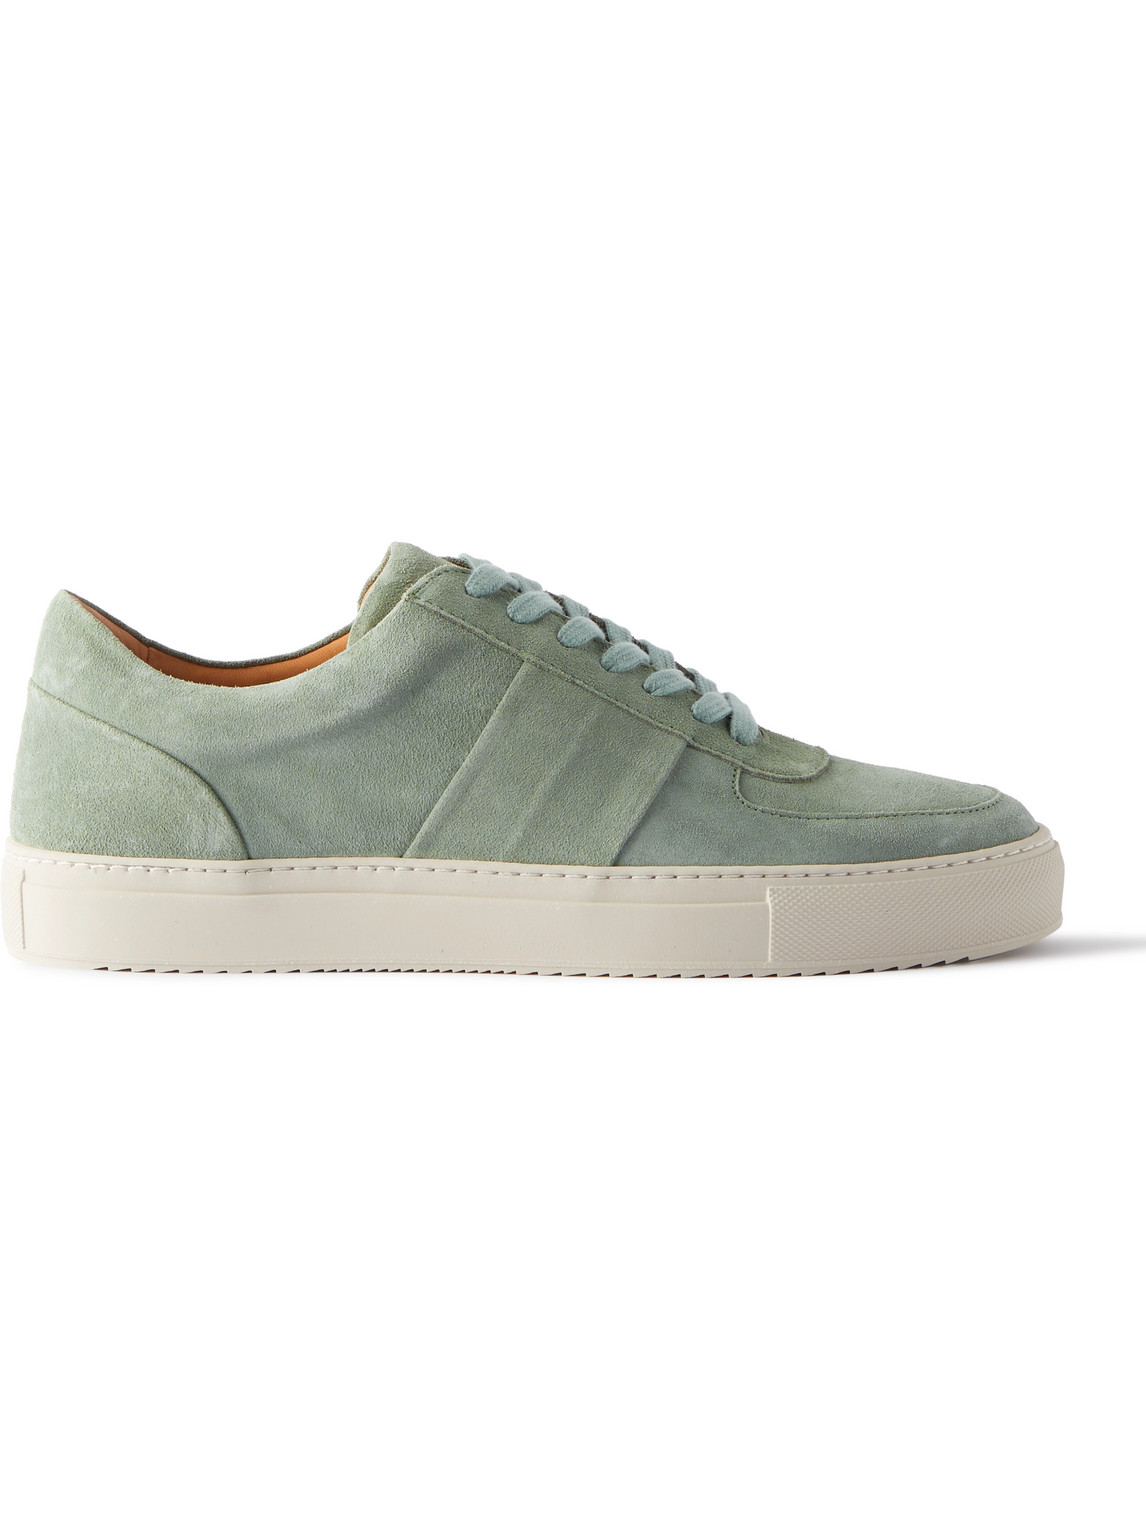 MR P LARRY REGENERATED SUEDE BY EVOLO® SNEAKERS